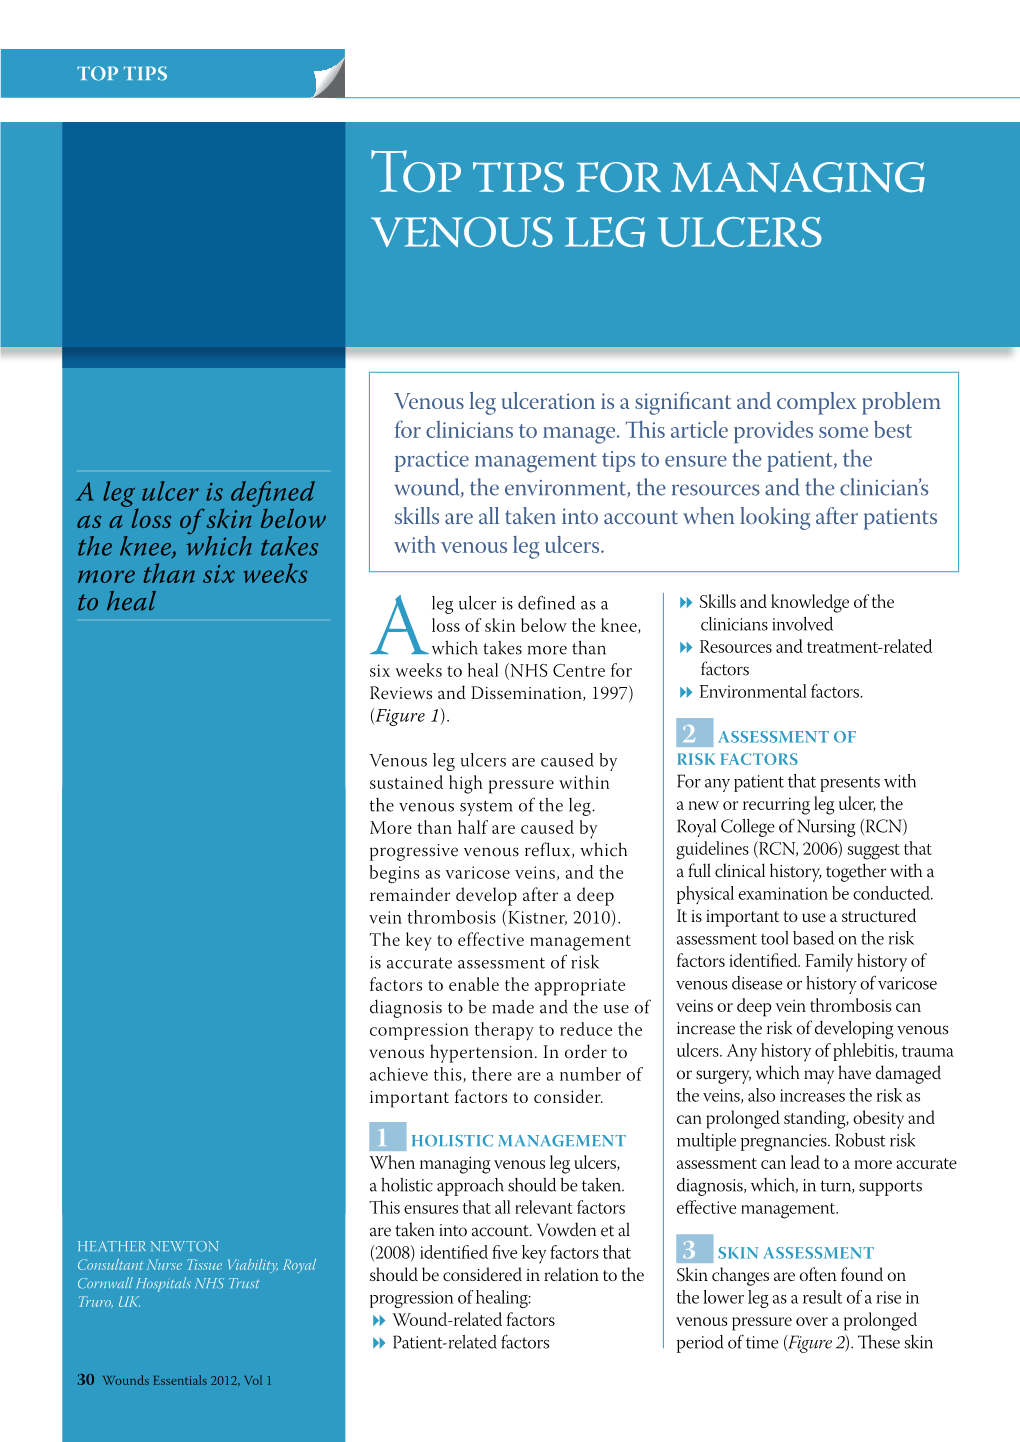 Top Tips for Managing Venous Leg Ulcers